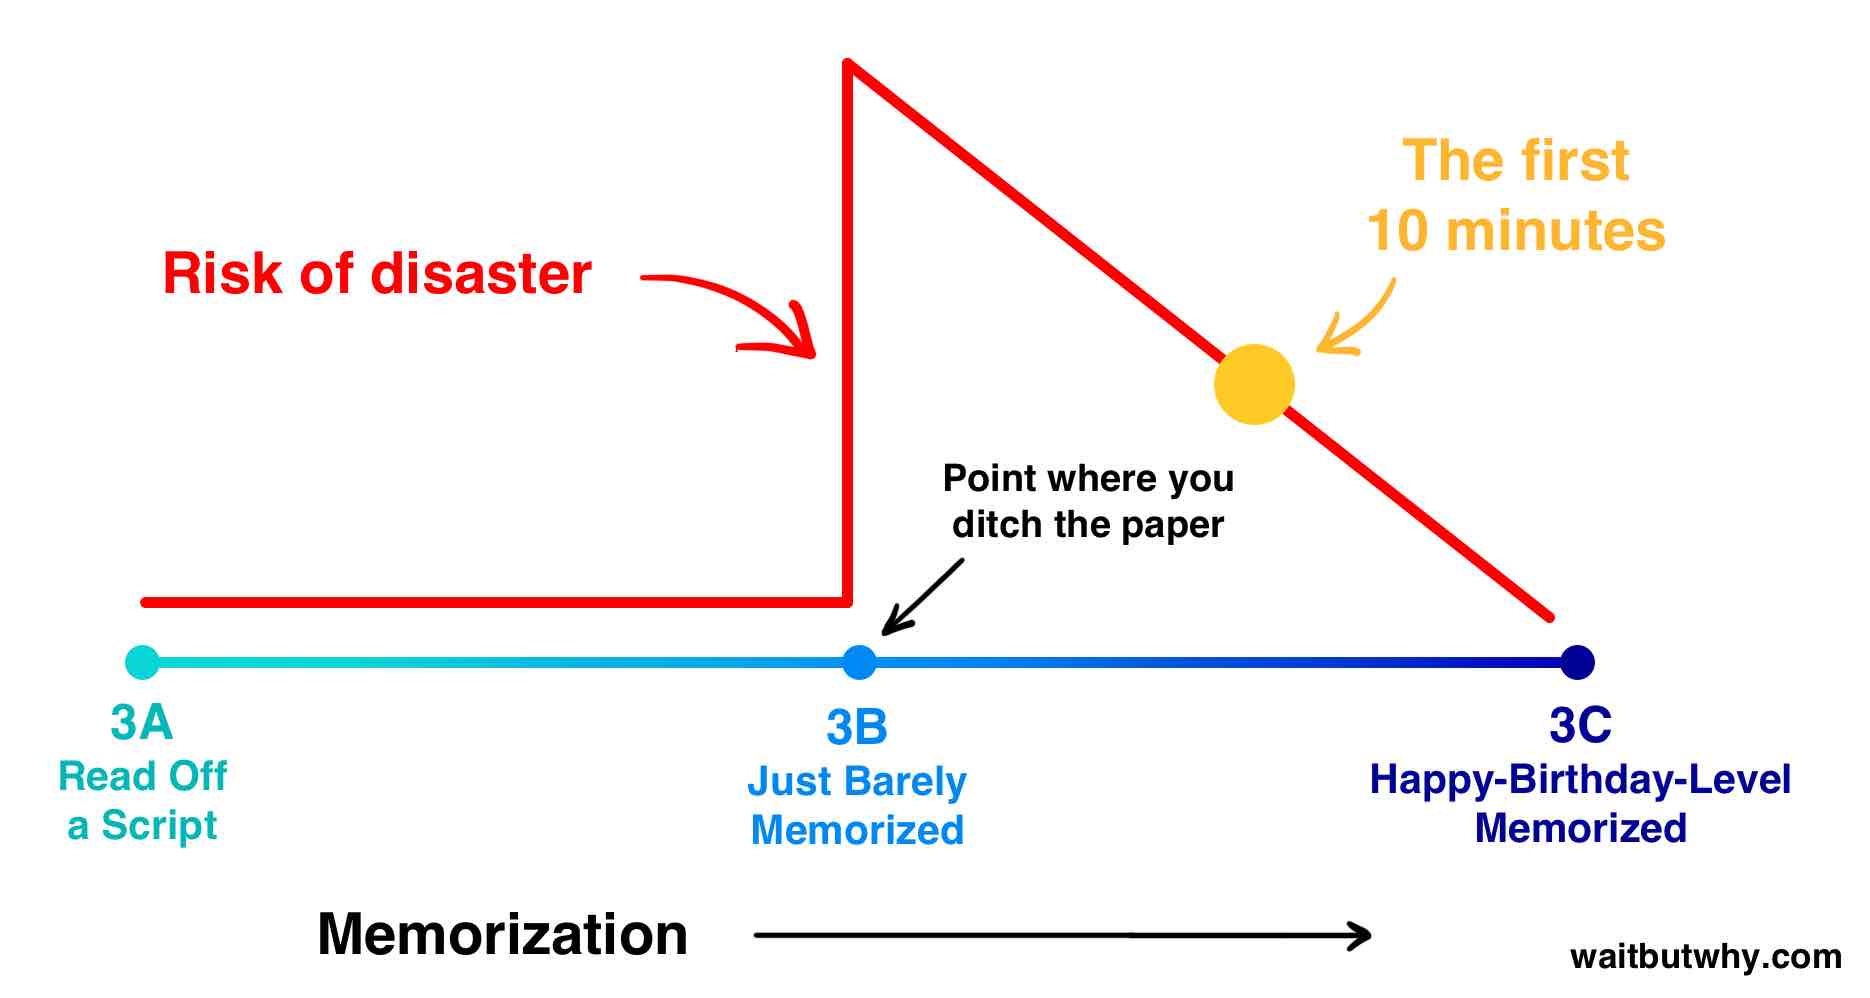 memorization spectrum with the first 10 minutes halfway between barely memorized and happy-birthday level